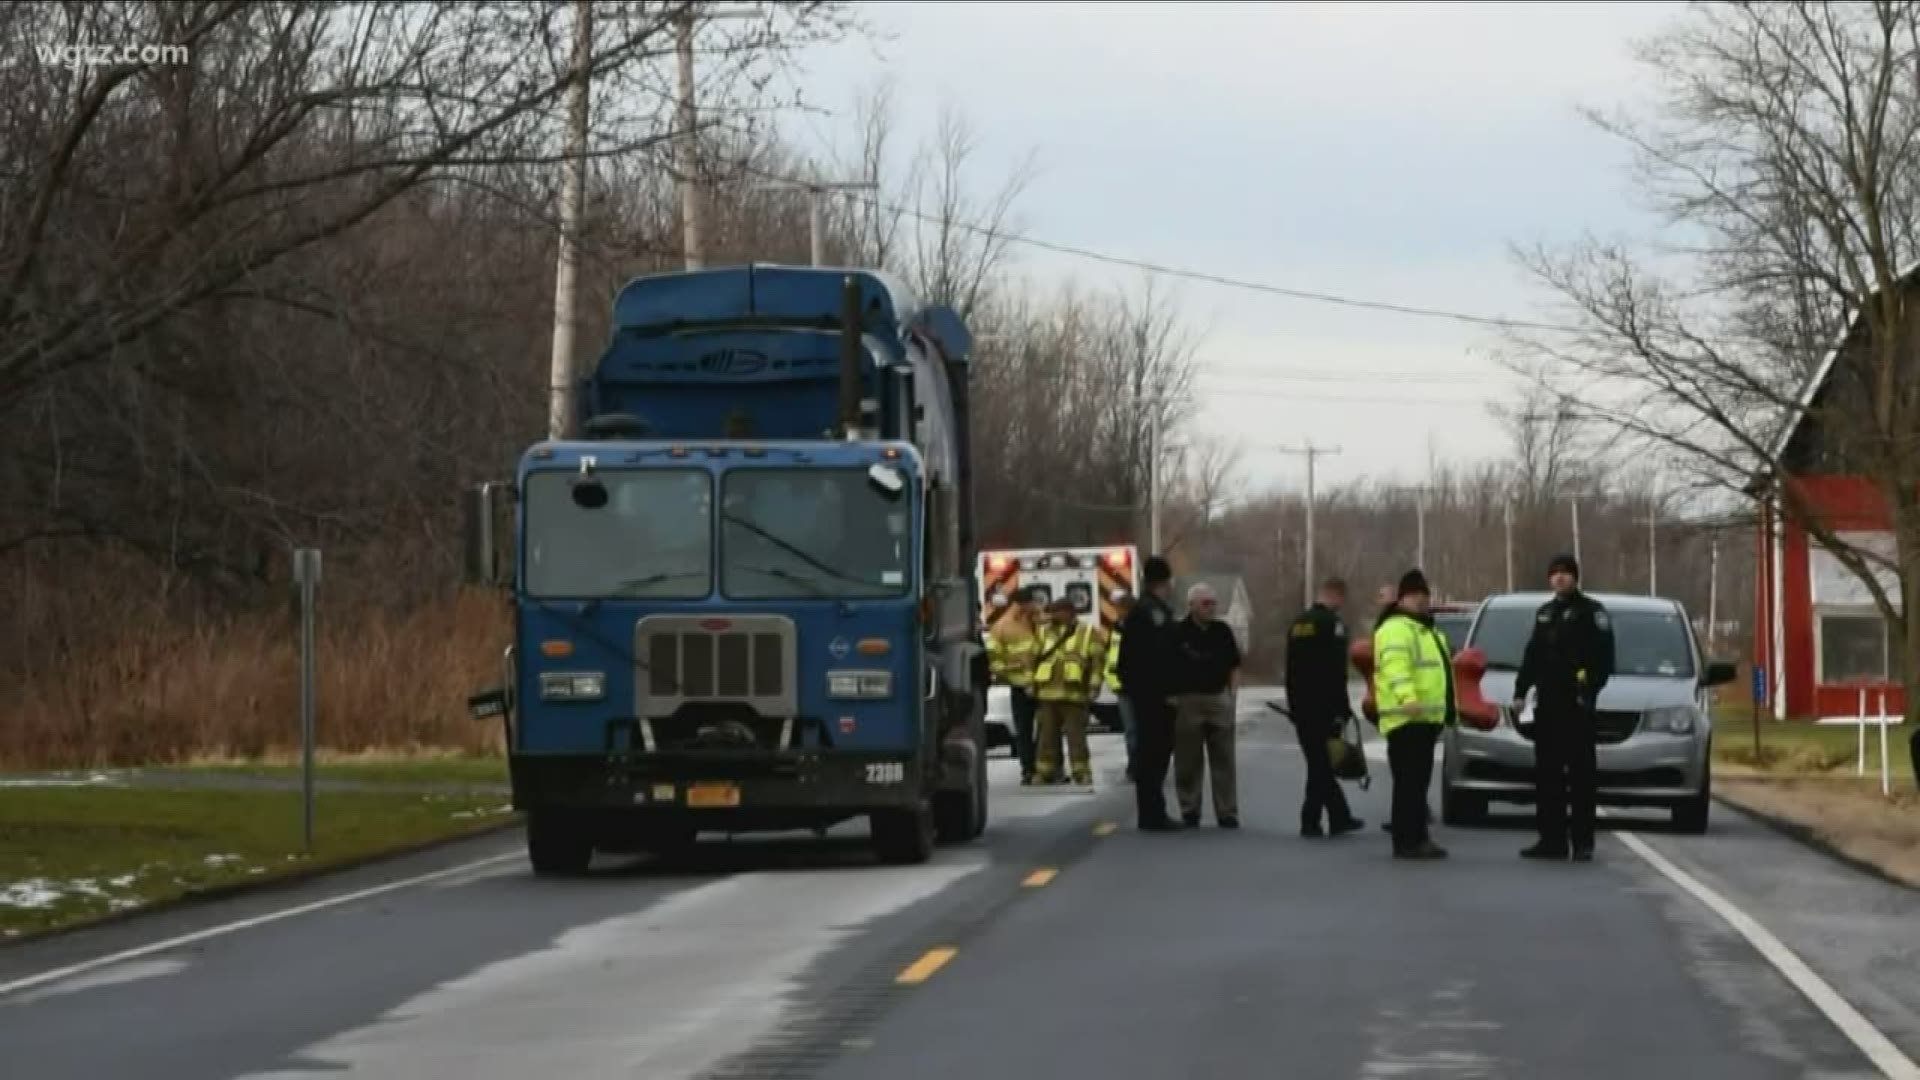 49-year-old Robert Knibbs was hit by a garbage truck while he was out on Cambria Wilson Road just after noon today.